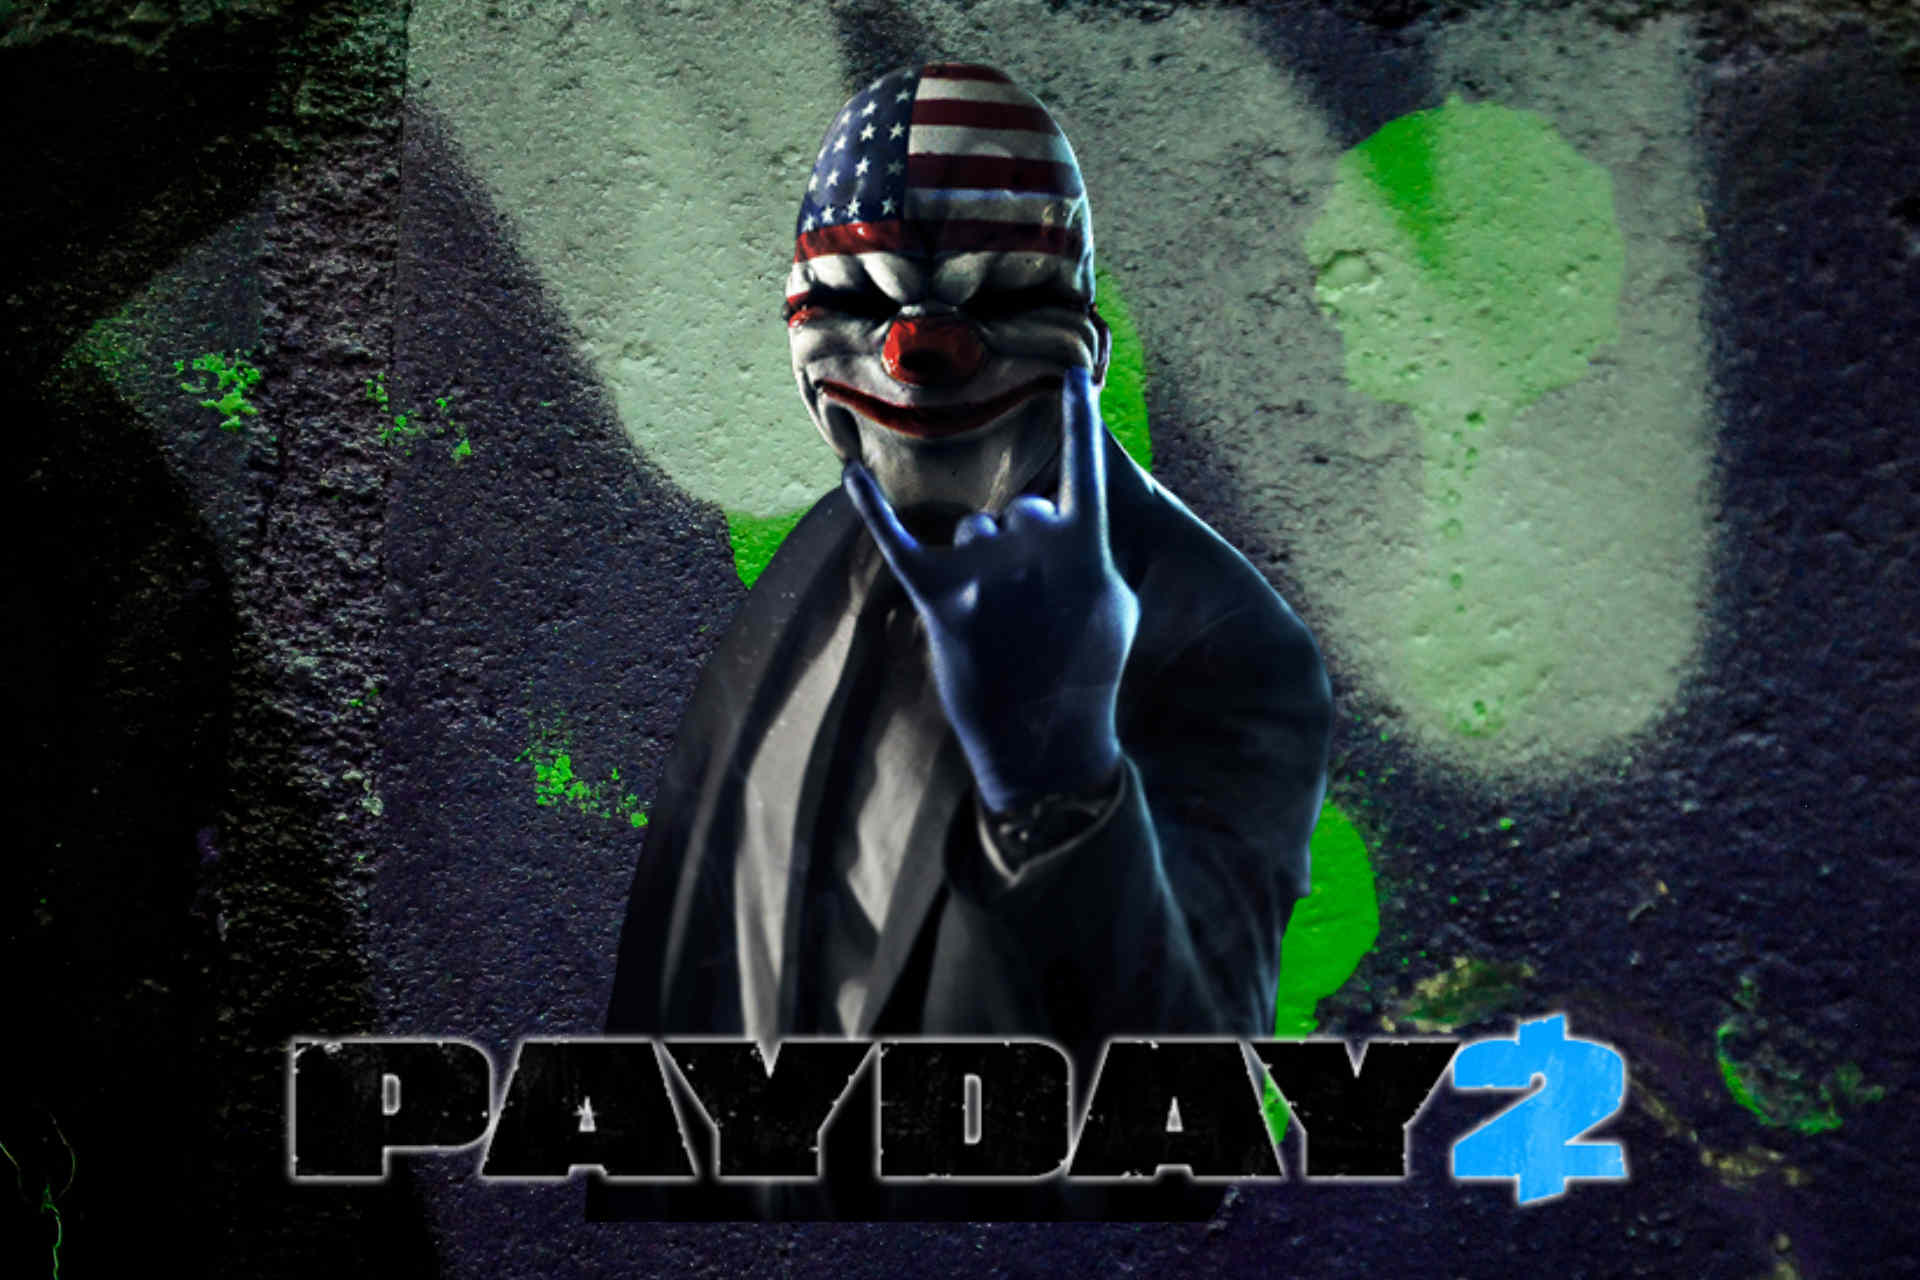 does big lobby work with blt payday 2